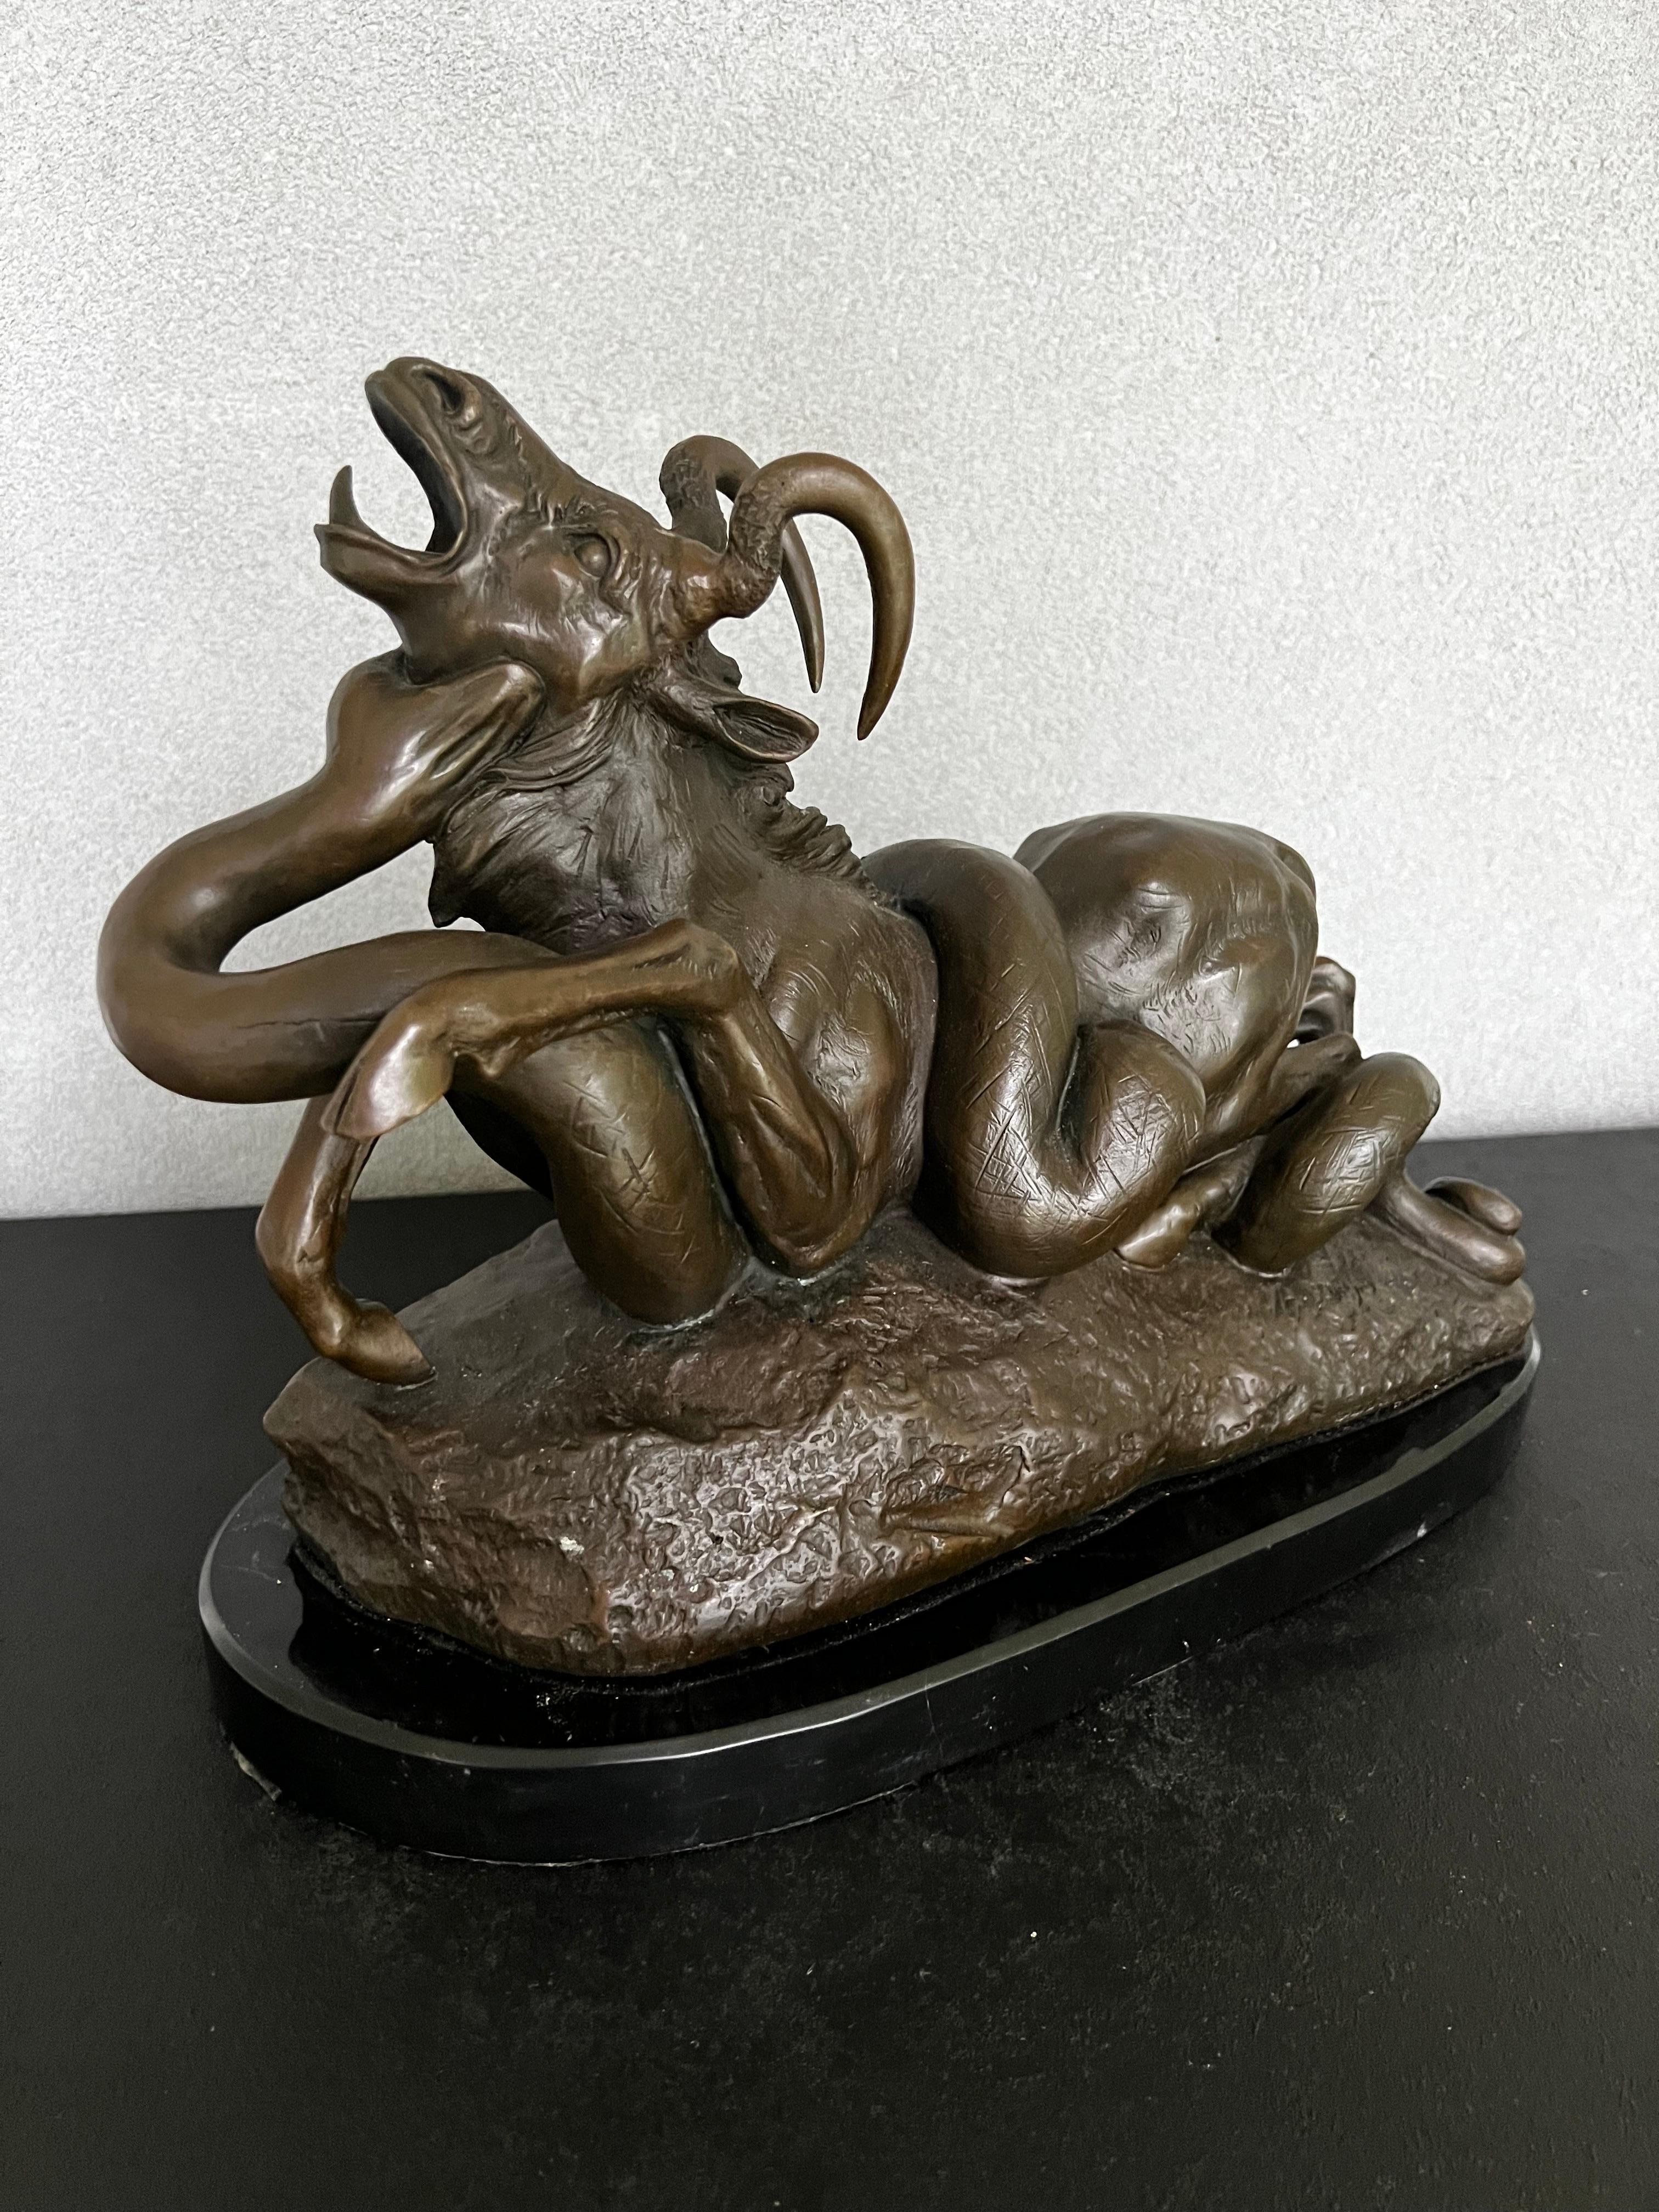 Magnificent high quality reproduction of Antoine-Louis Barye‘s famous Python Killing Gnu, cast in bronze with a 1” black marble base. This piece it’s large and heavy and would be and statement piece in any room. Would look perfect on a fireplace